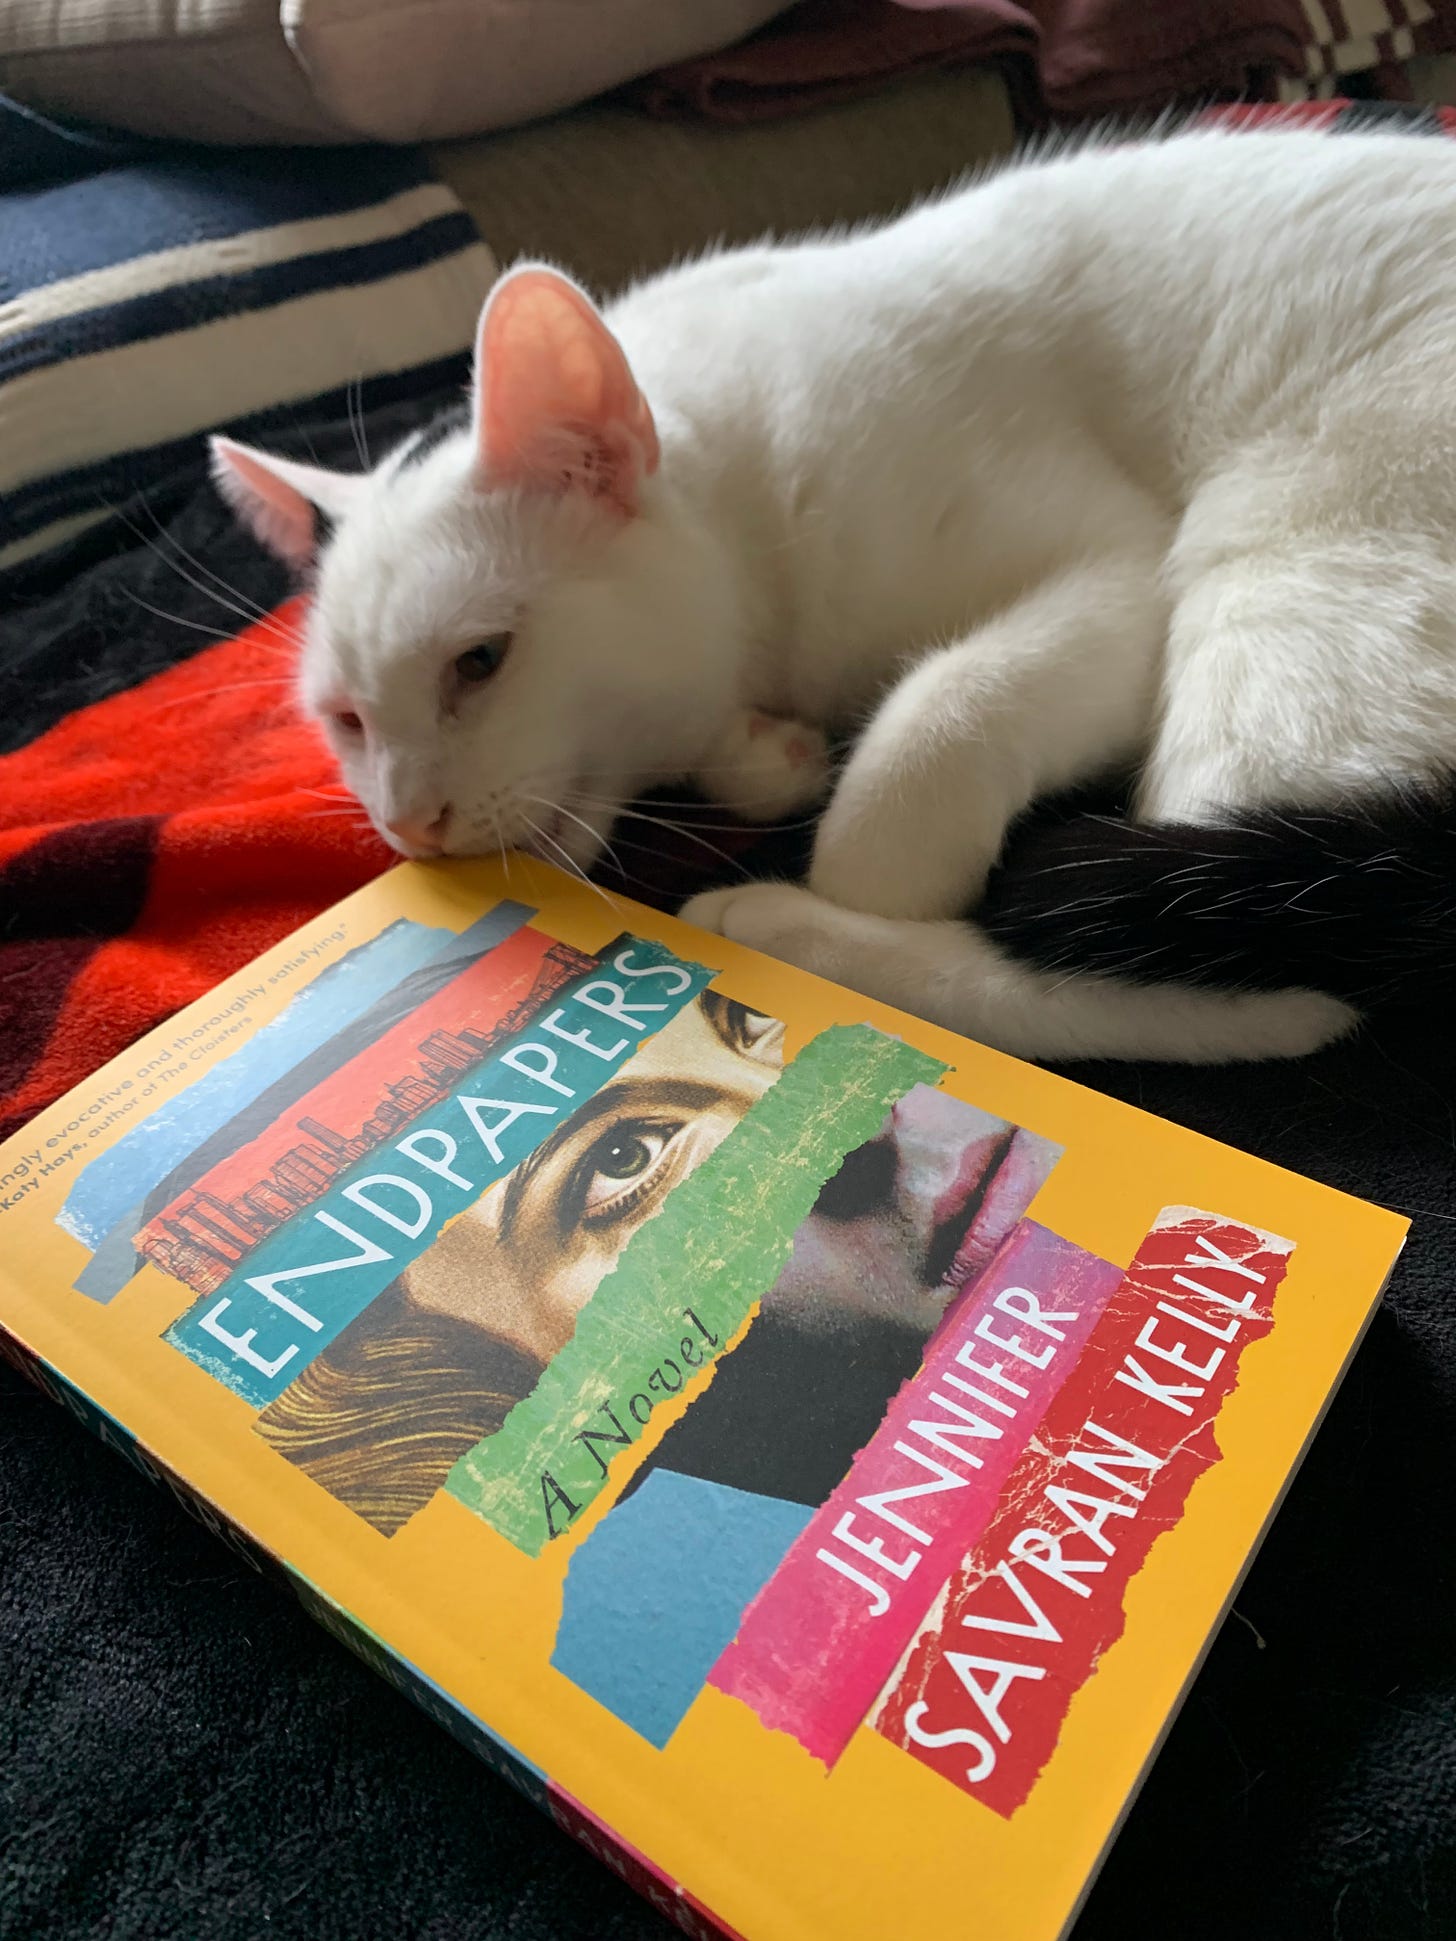 A white cat with black spots chewing on the top right corner of a copy of ENDPAPERS. On the book cover is a collage of a person's face made from torn horizontal strips of colorful paper and photographs. The top half of the face is feminine and the bottom half is masculine.